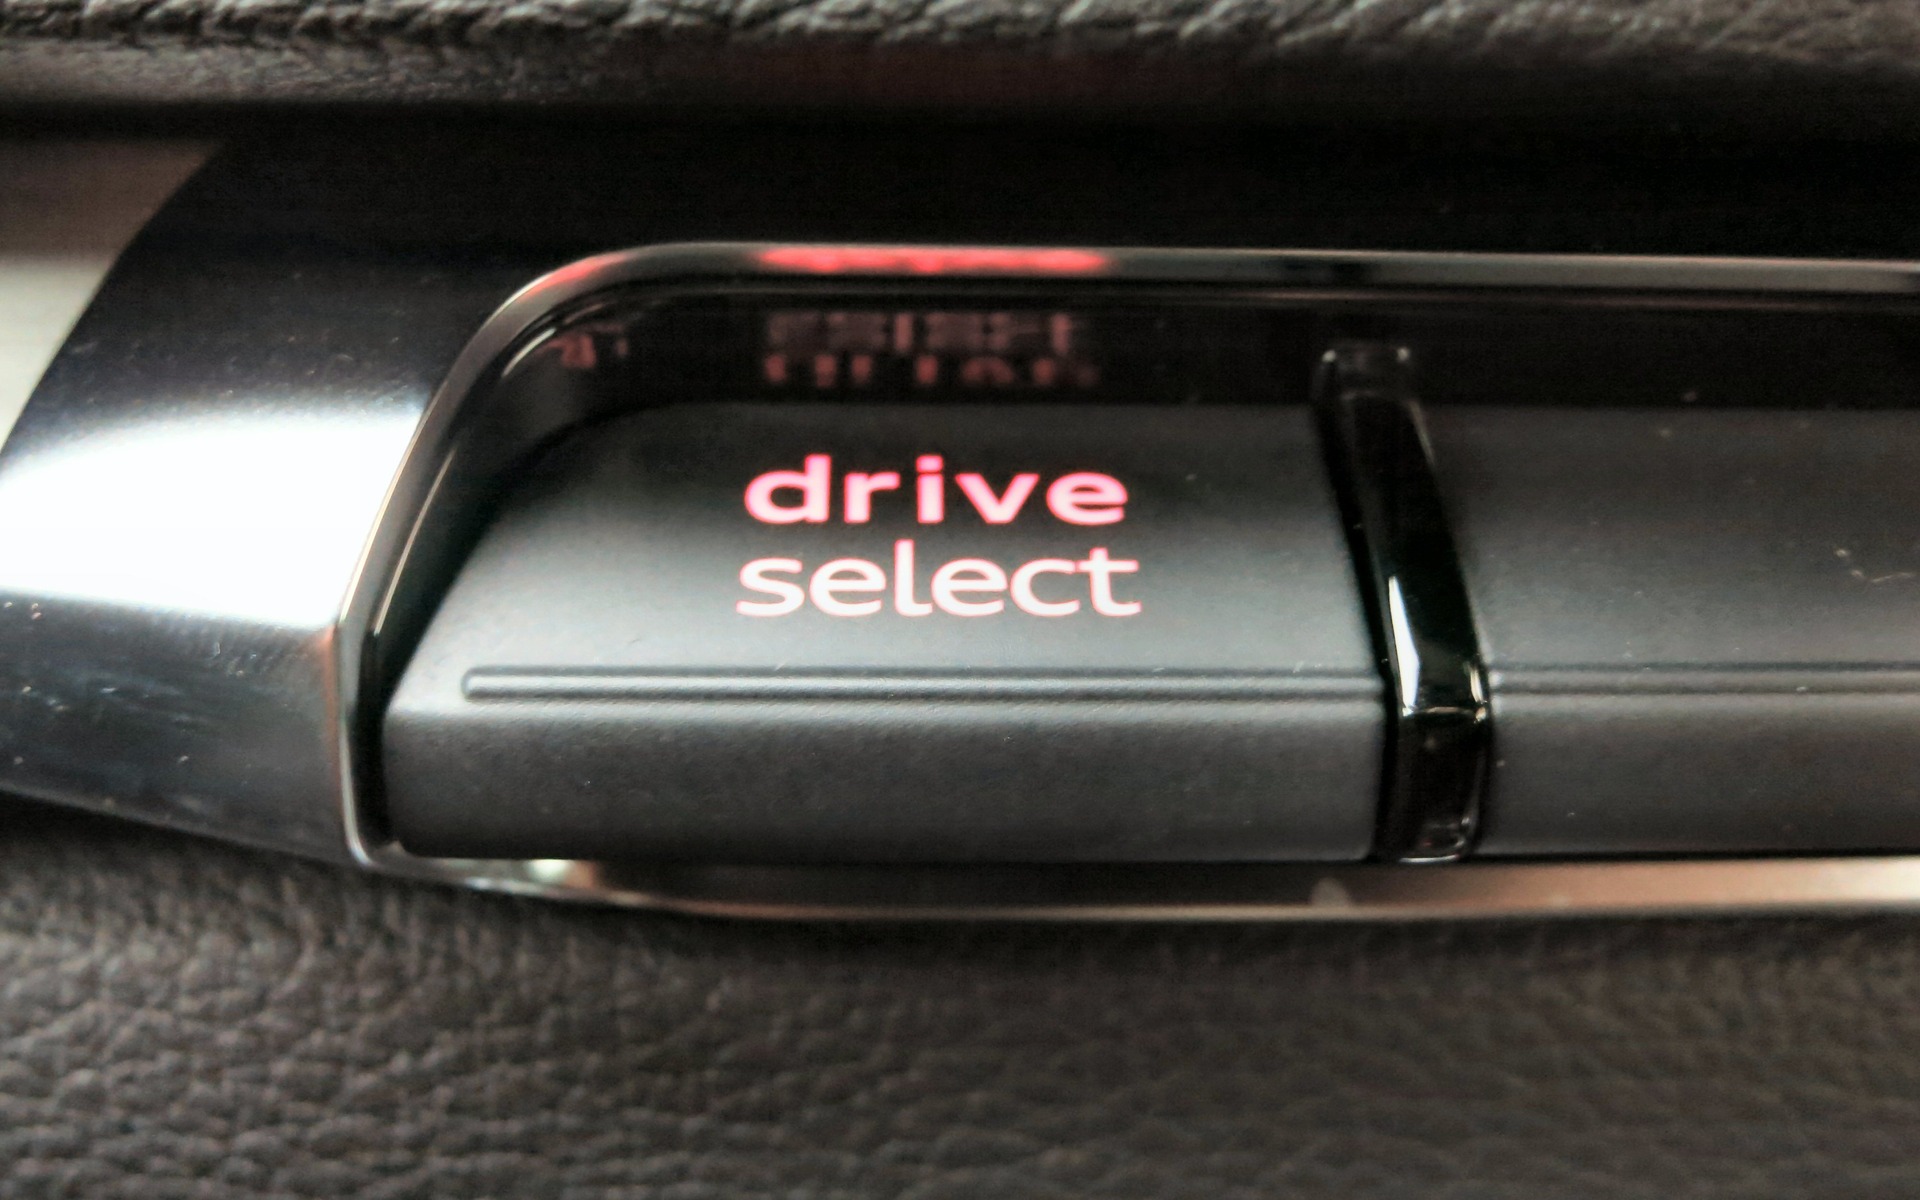 You get Dynamic, Normal, and Individual drive modes.